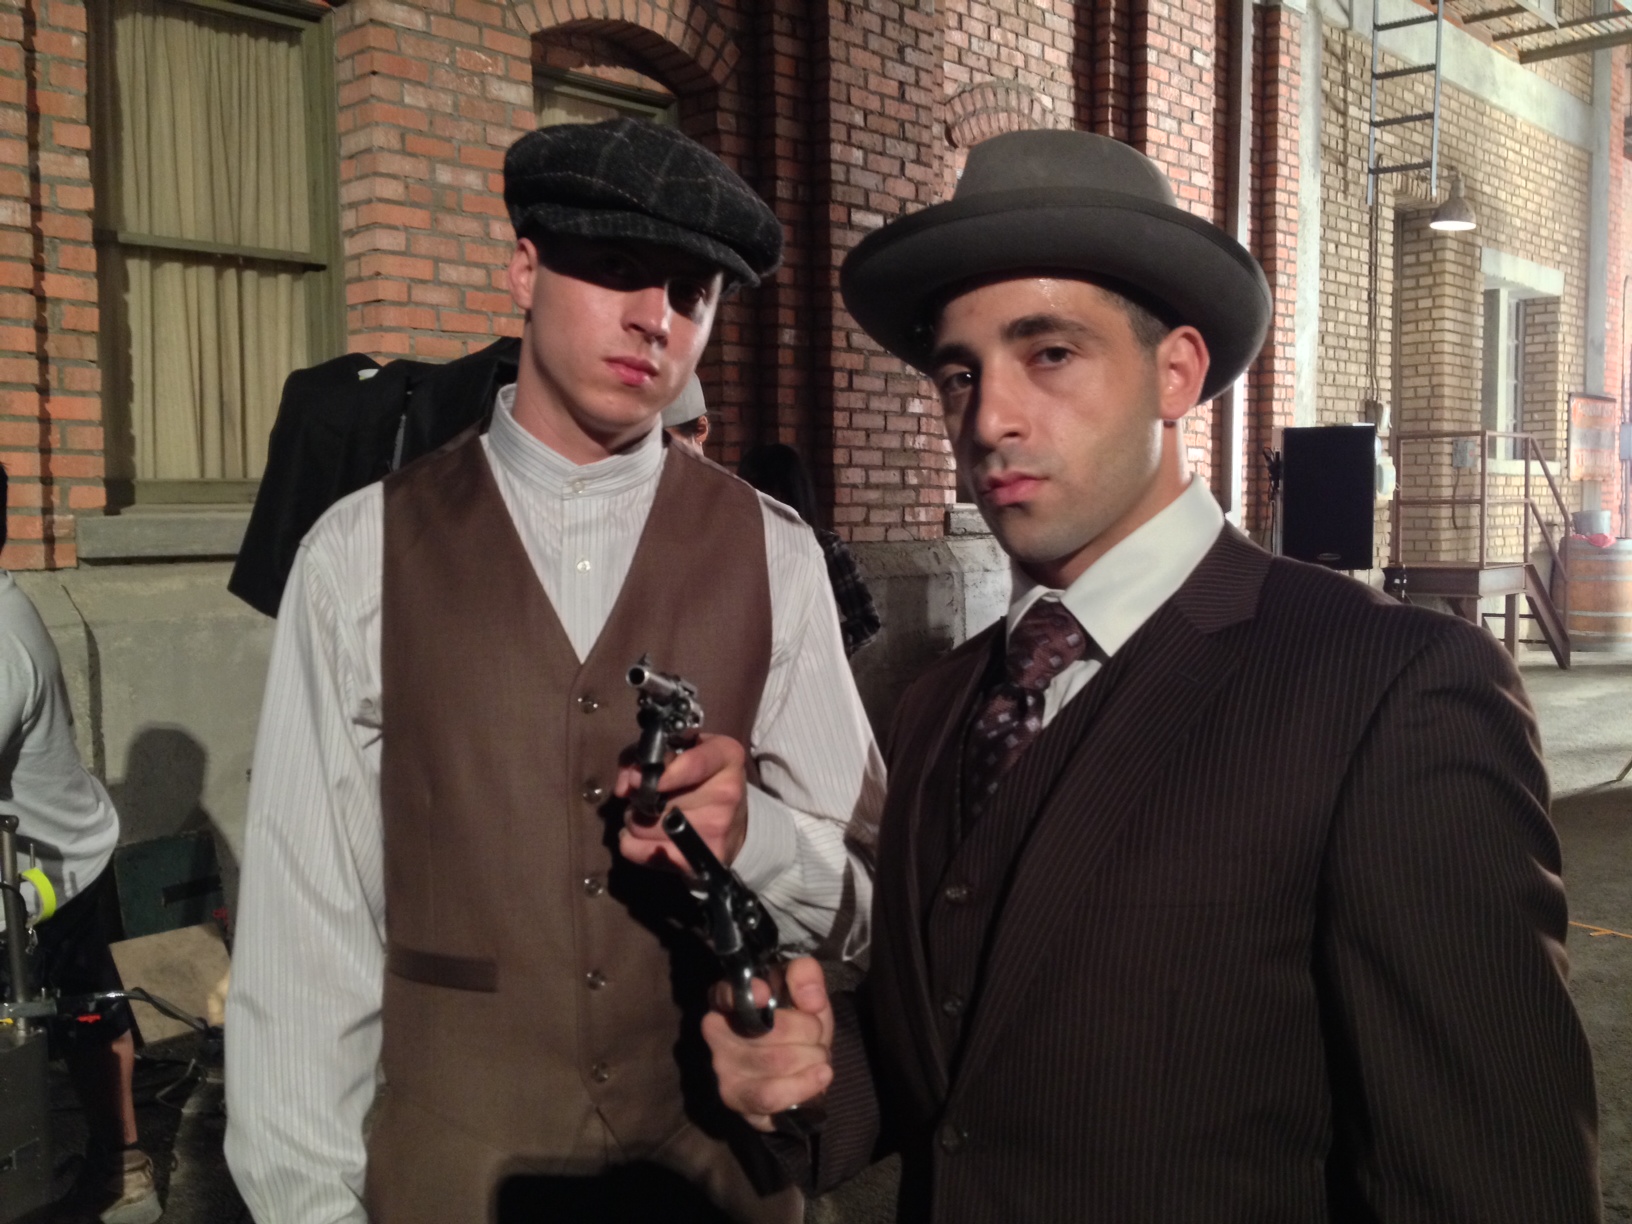 Devon Coull and John Cannizzaro on set of TNT's Mob City